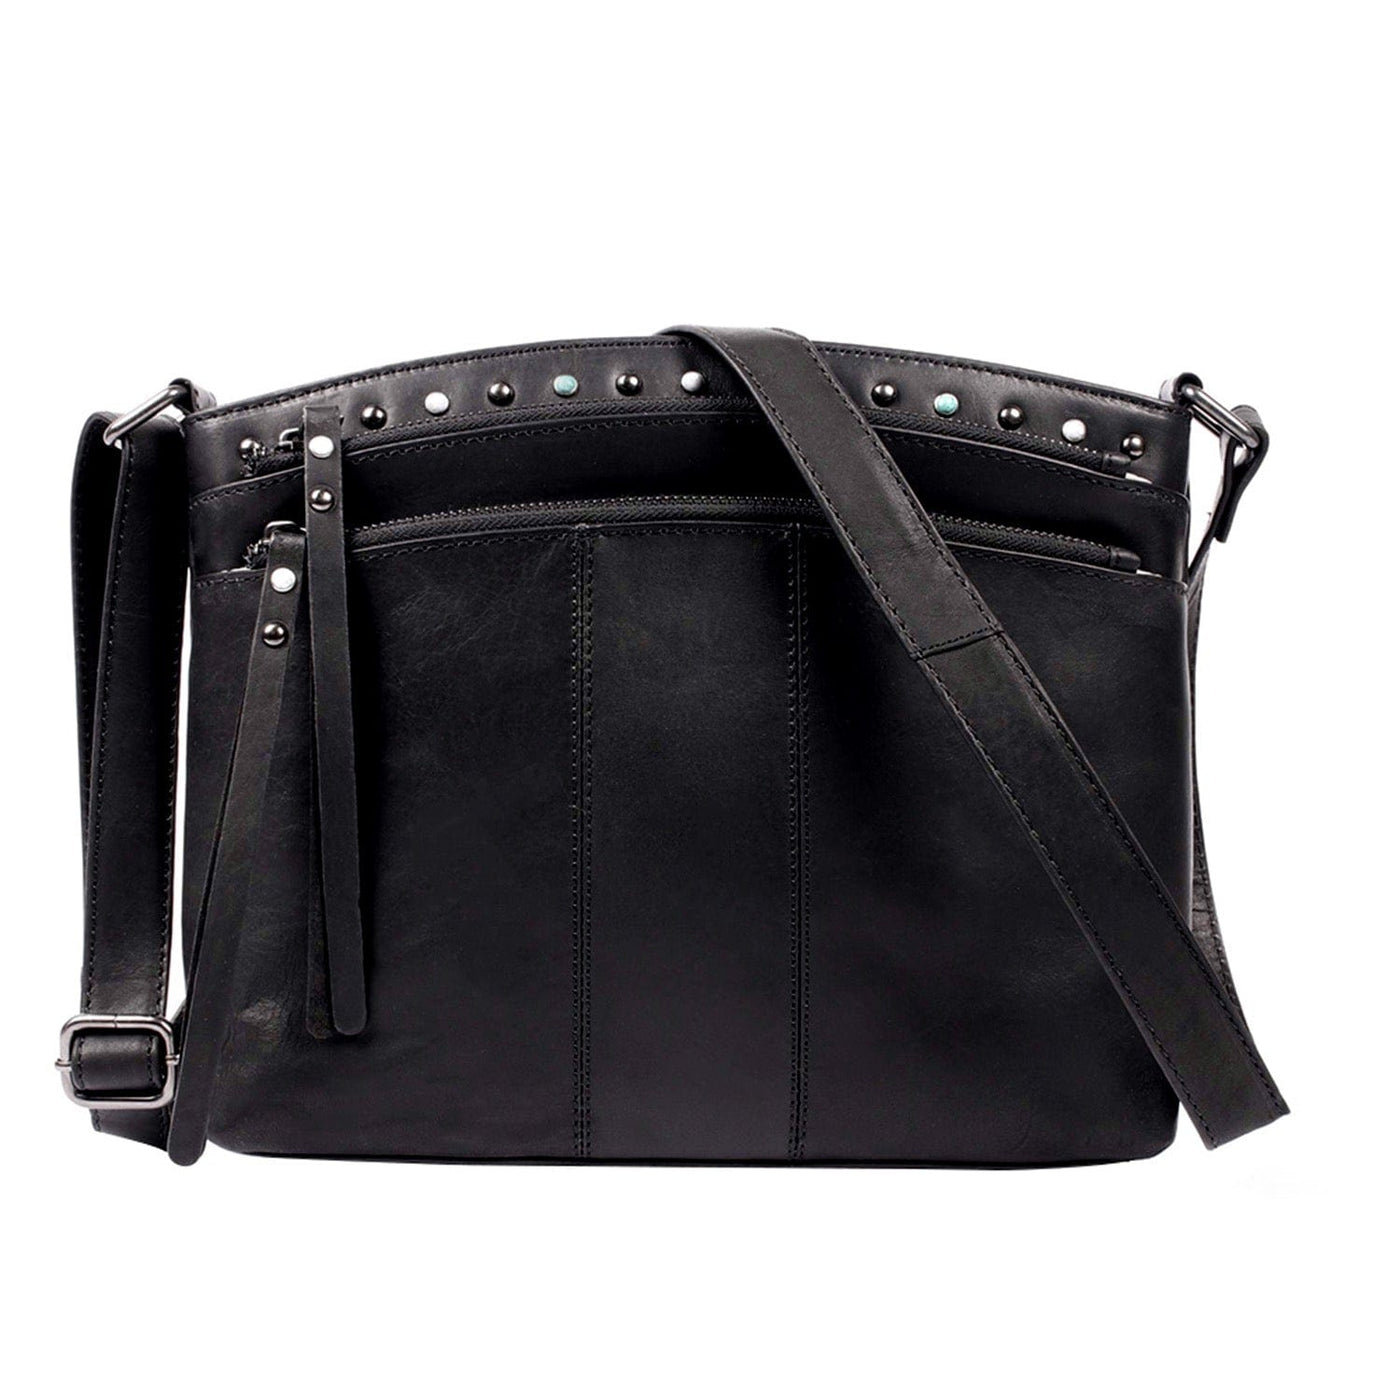 Holstere Genuine Pebbled Leather Studded Black Crossbody Strap with Gold-Toned Hardware